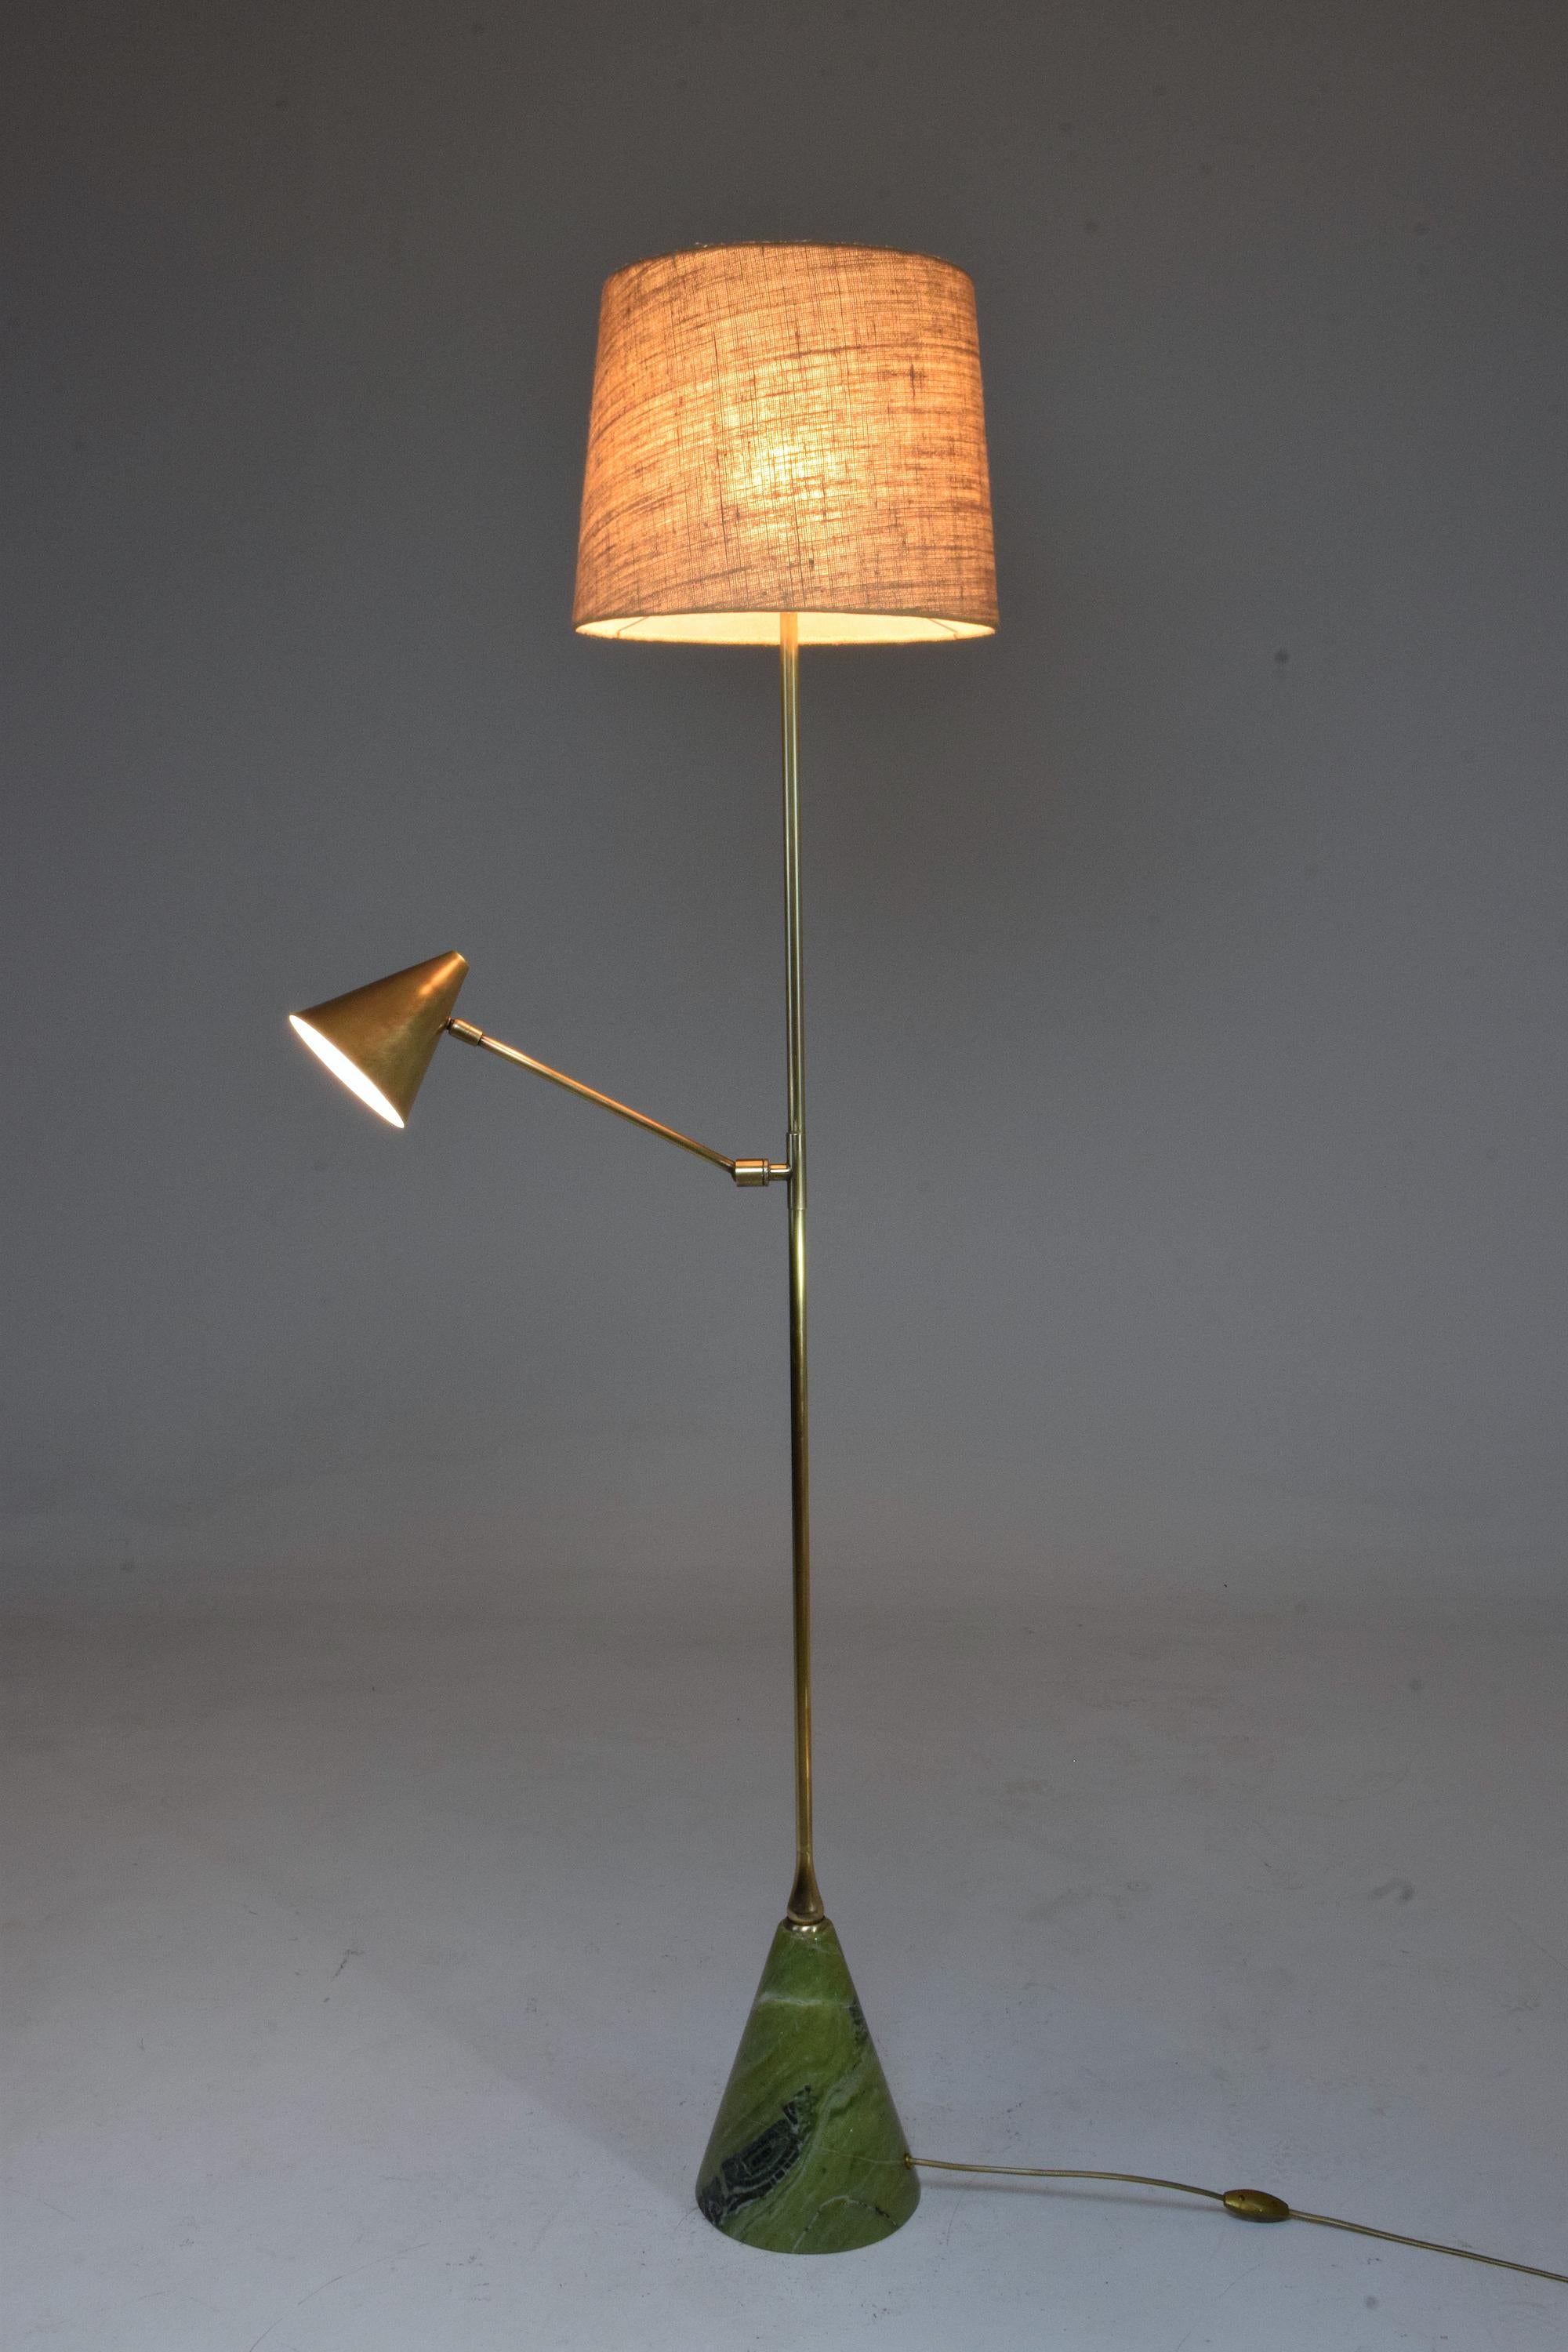 This floor lamp is designed with a reading light positioned mid-length which articulates a conical brass shade, so you can direct the light with ease. Both lighting systems work independently making it a functional addition to any living areas near